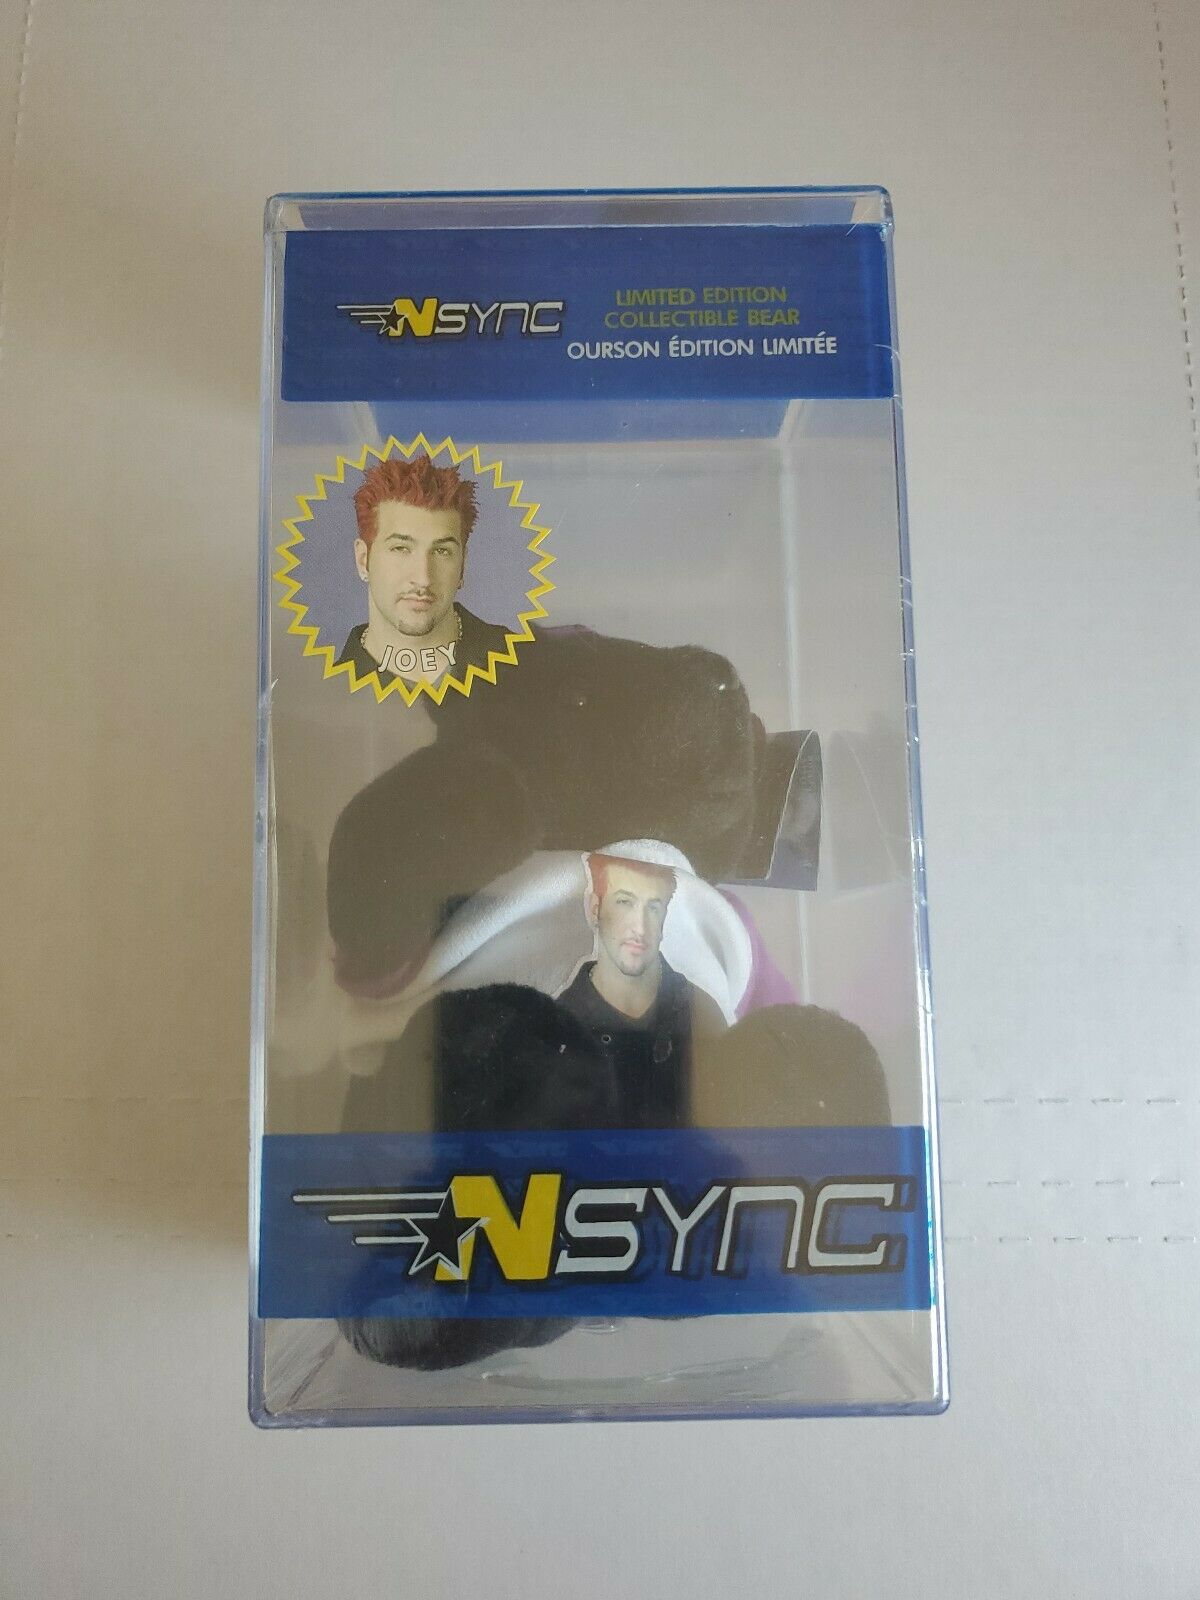 Joey 'nsync Limited Edition Collection Black Bear Sealed Lmtd 8752 Of 25000 New